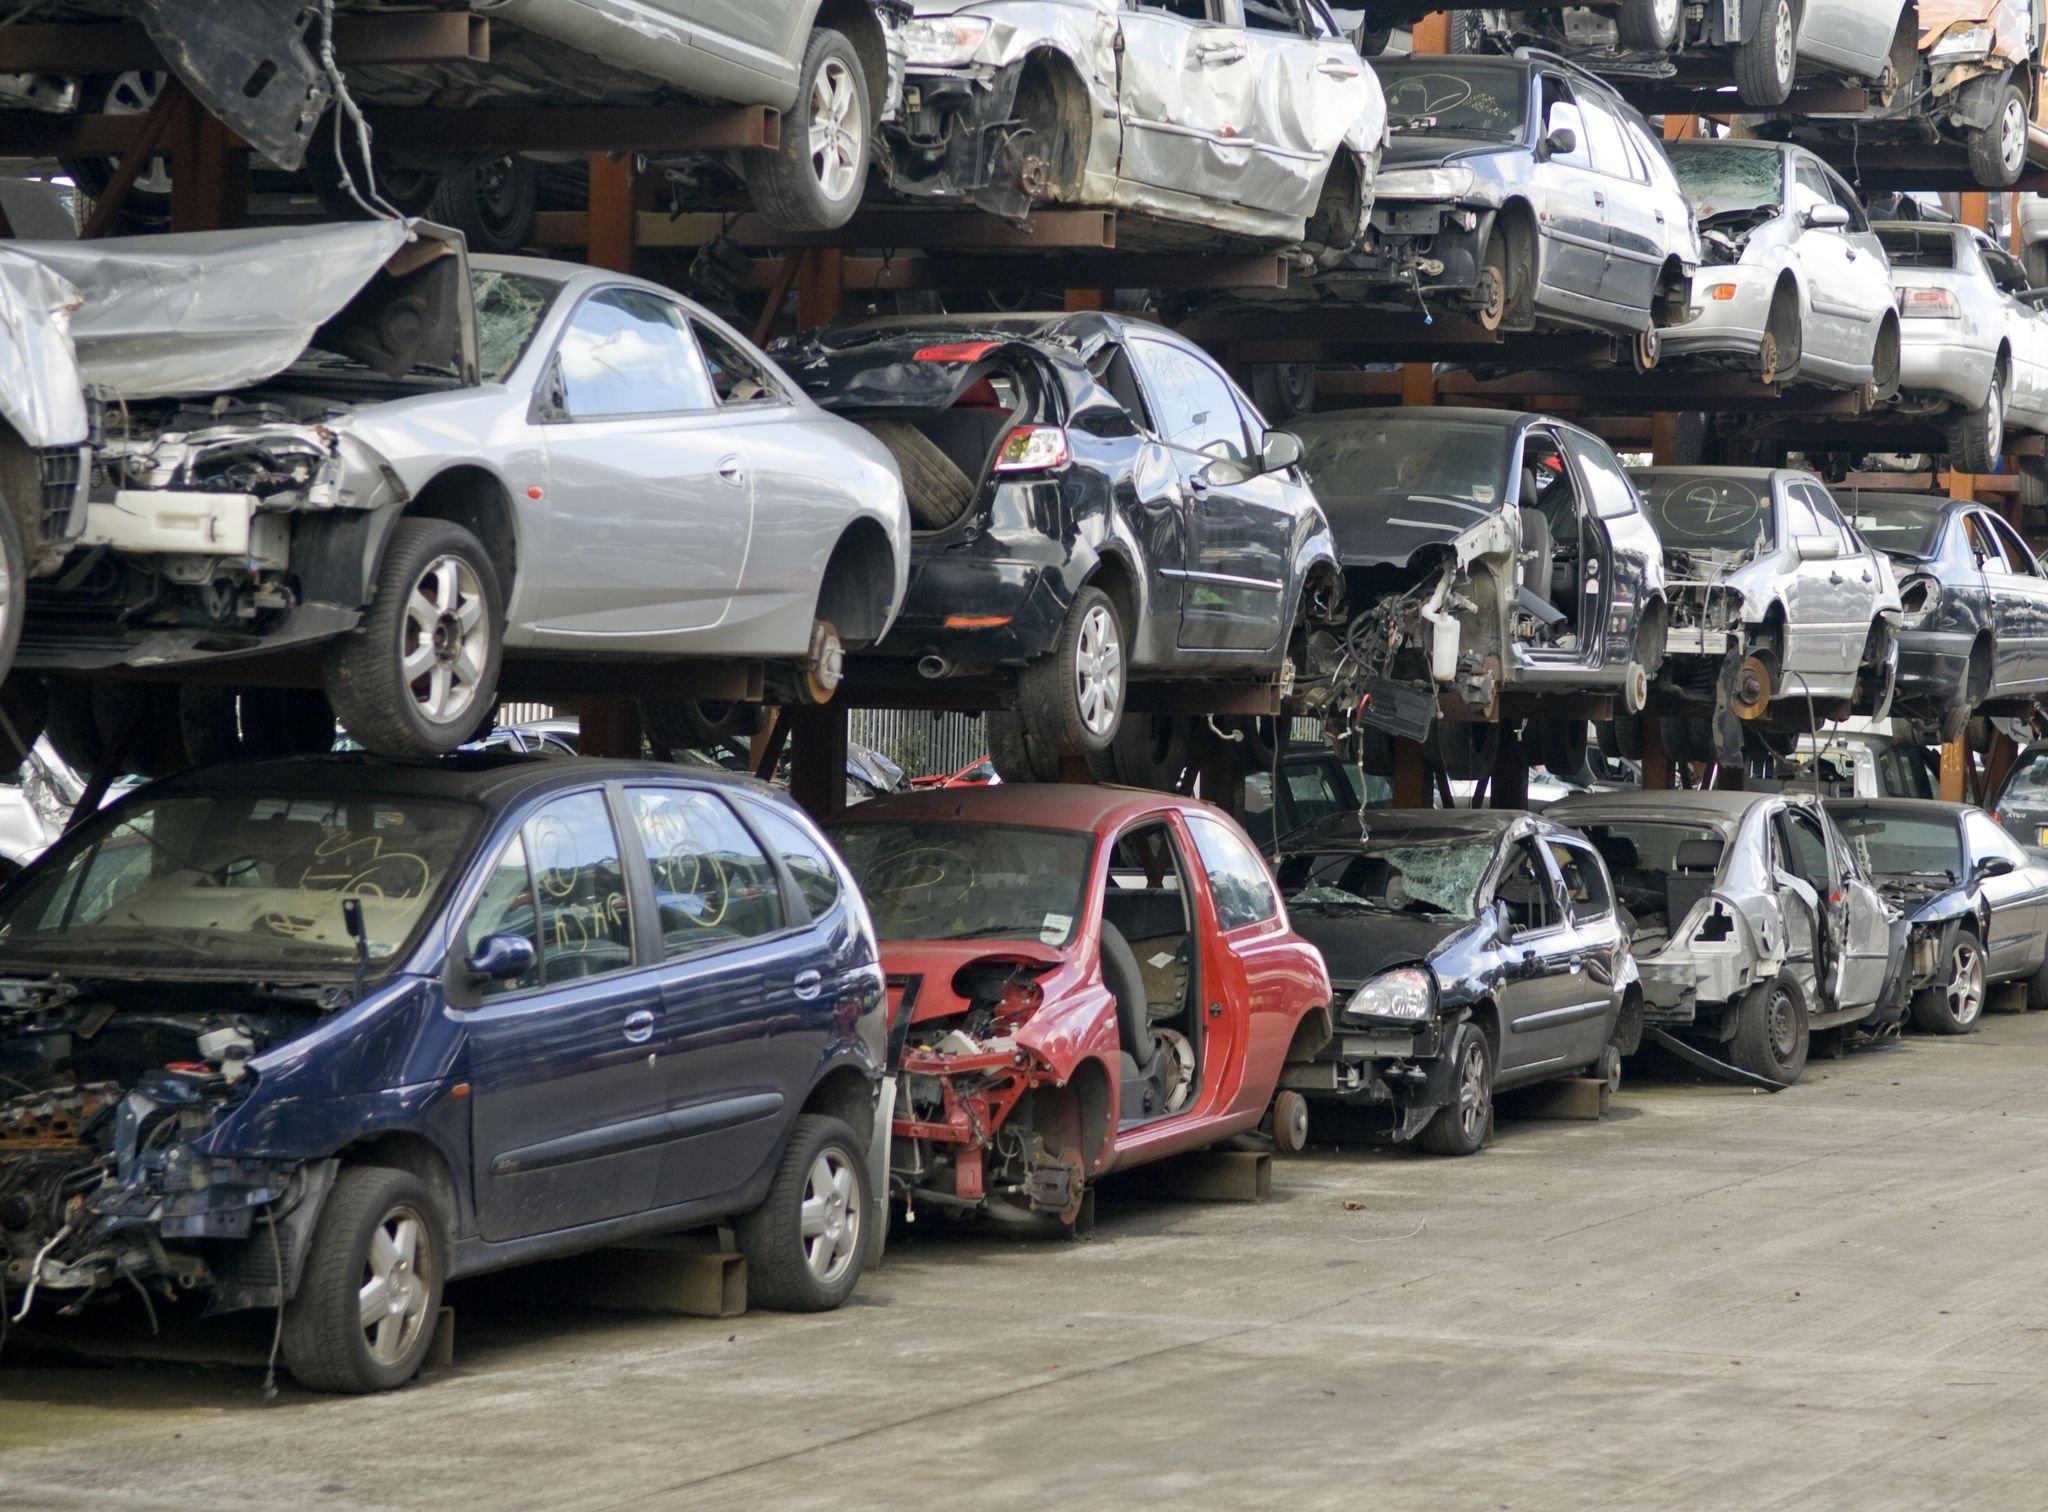 How Do I Find a Trusted Salvage Yard